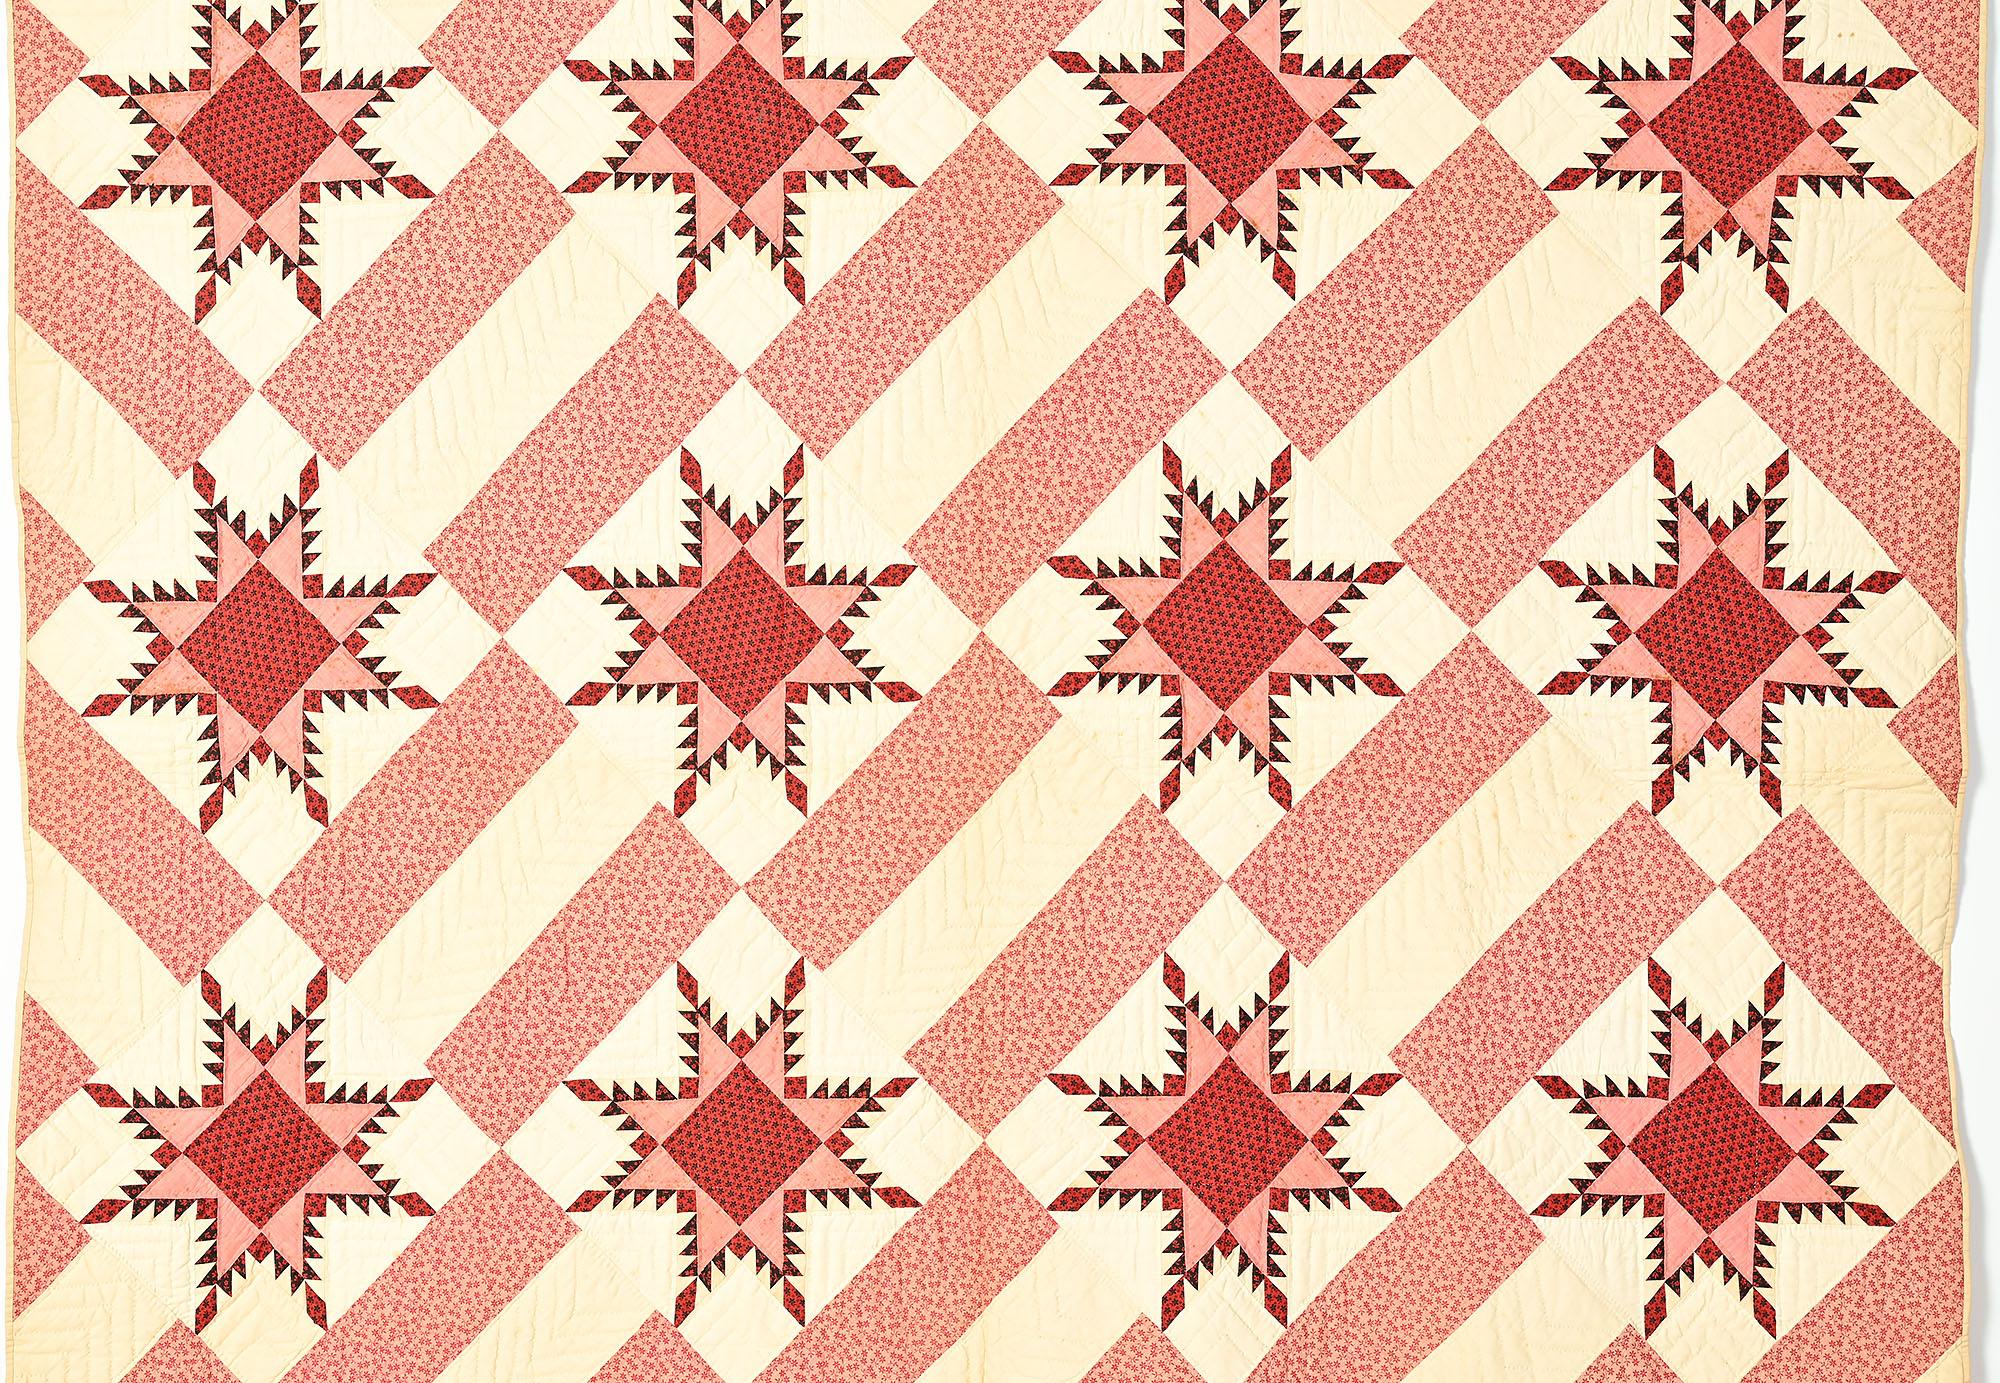 Finely crafted Feathered Stars quilt made more unusual with the pieced Bars alternating blocks. The quilt is in unwashed, excellent condition. It is quilted with chevrons throughout. There are some tiny, tiny brown specks in the double pink calico